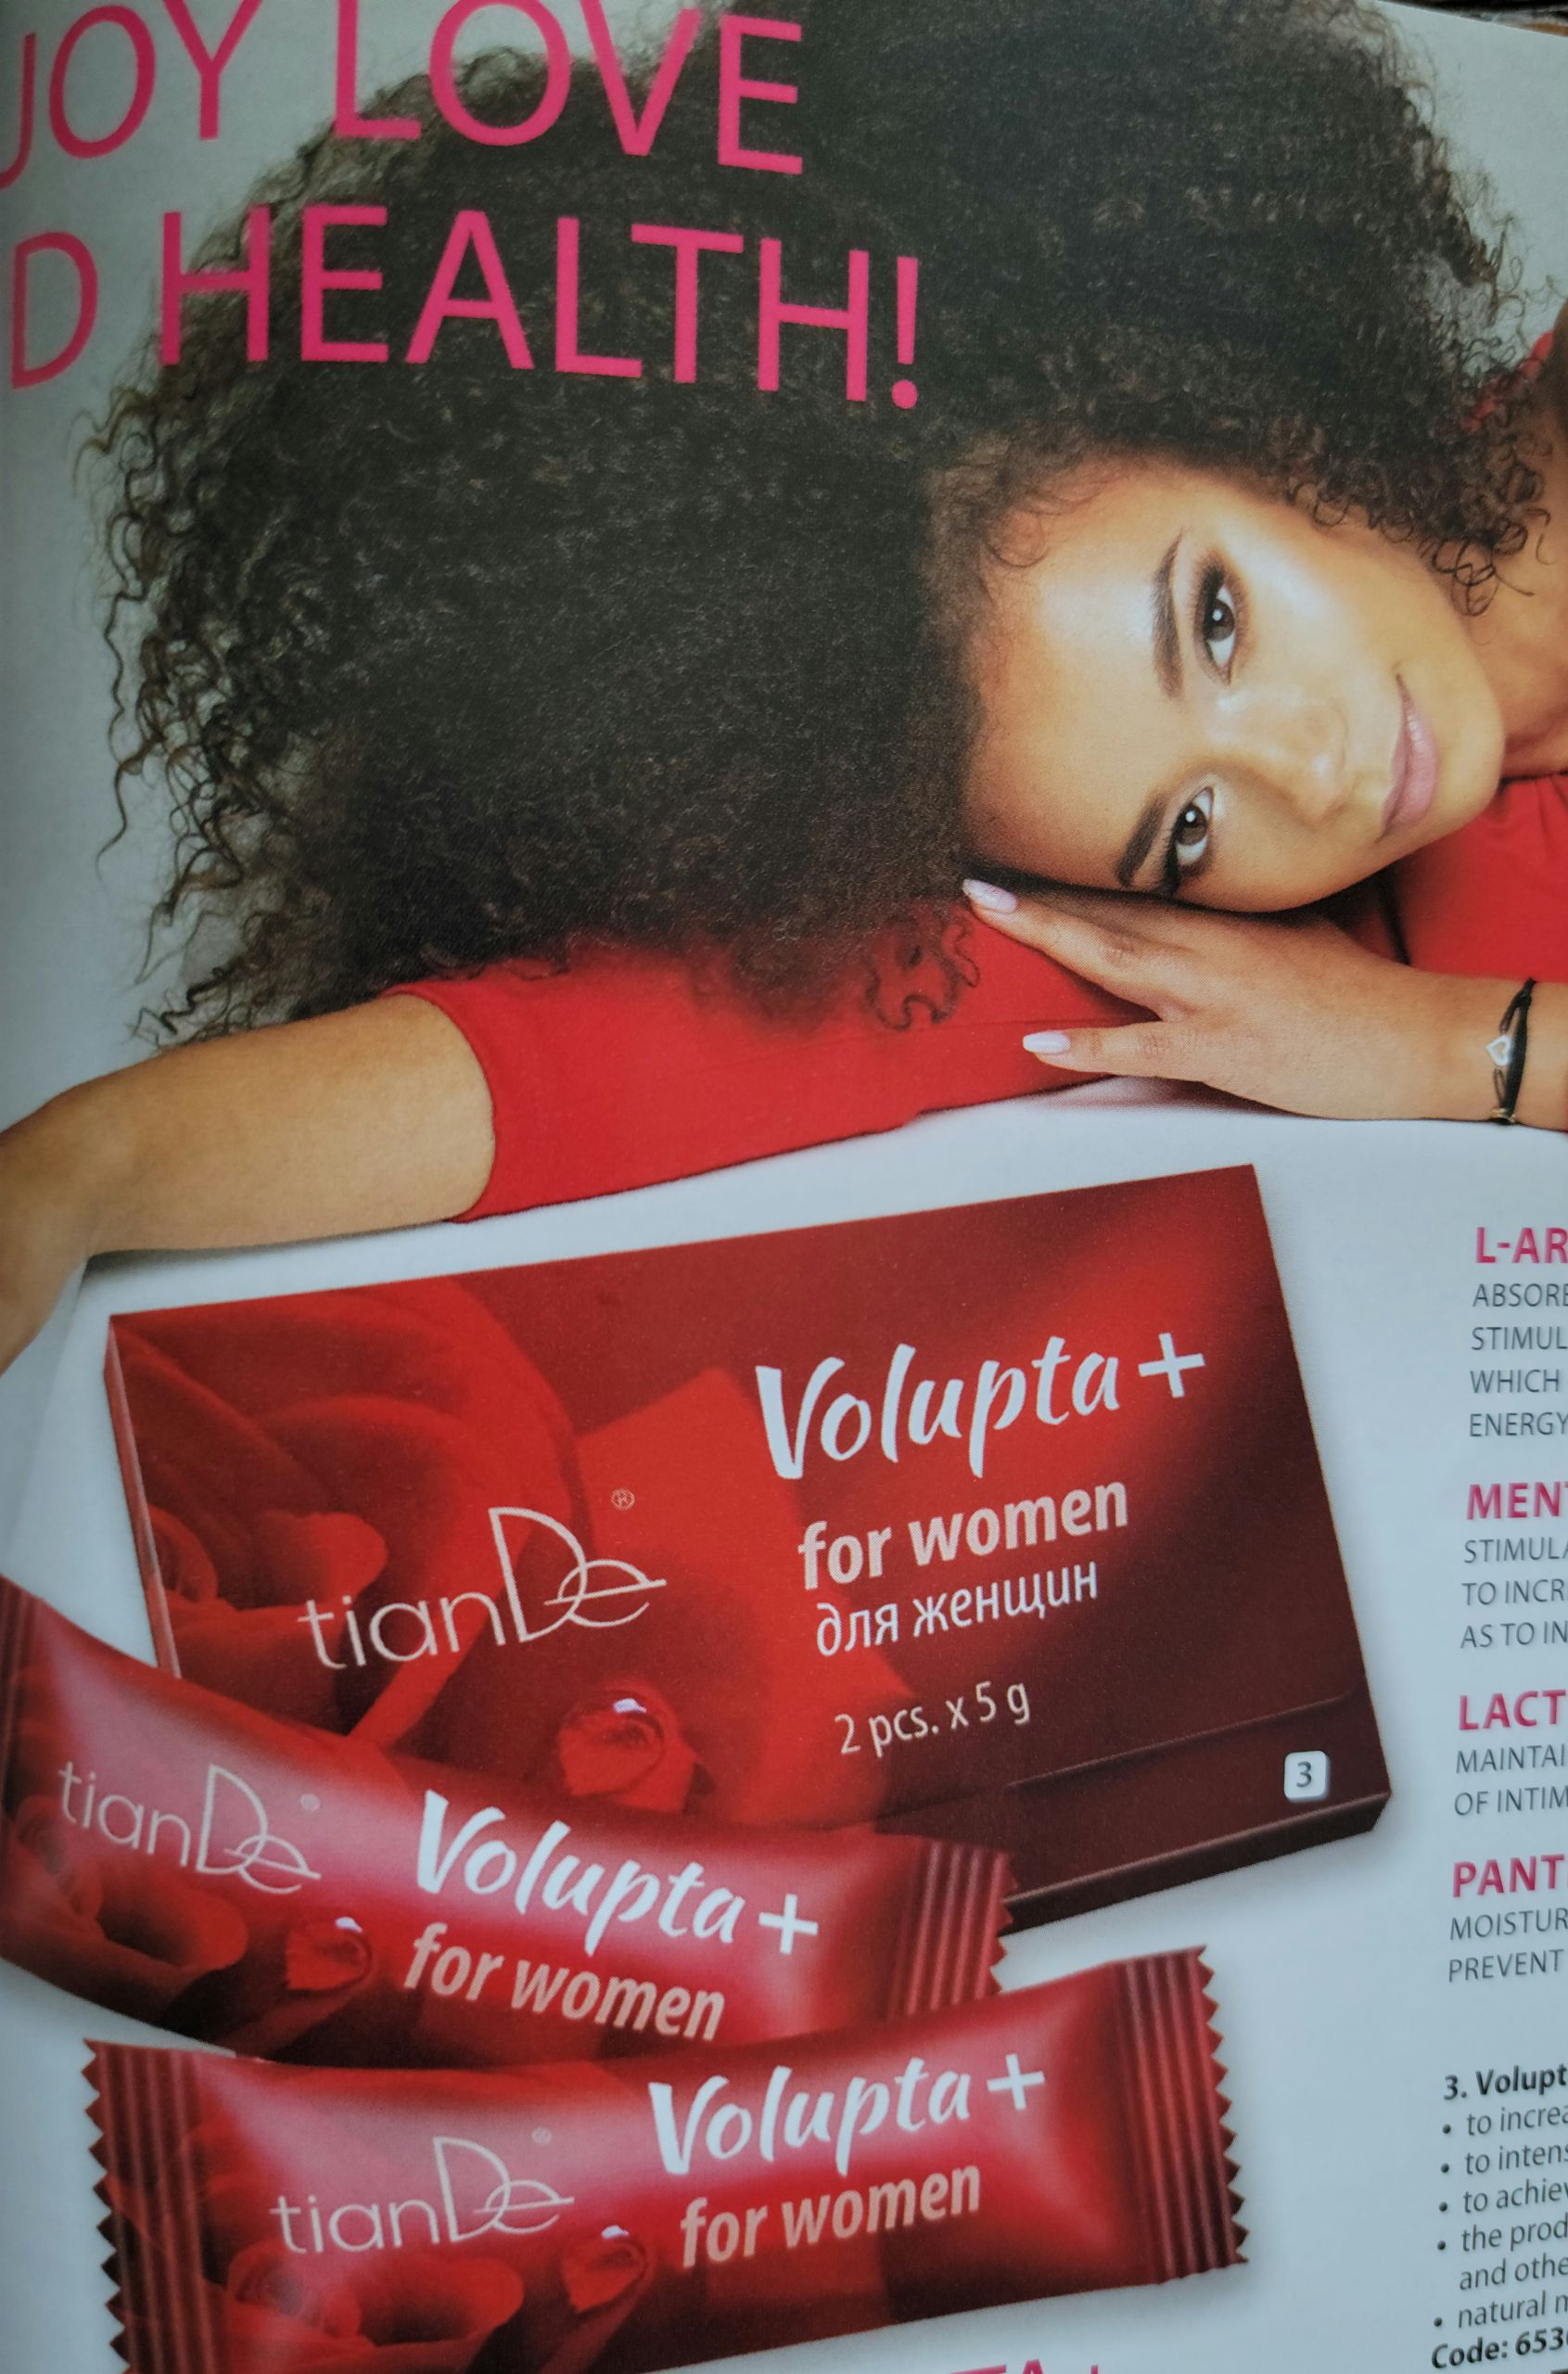 Volupta+ for Women,Delight In Your Bed,,2pcs x 5g